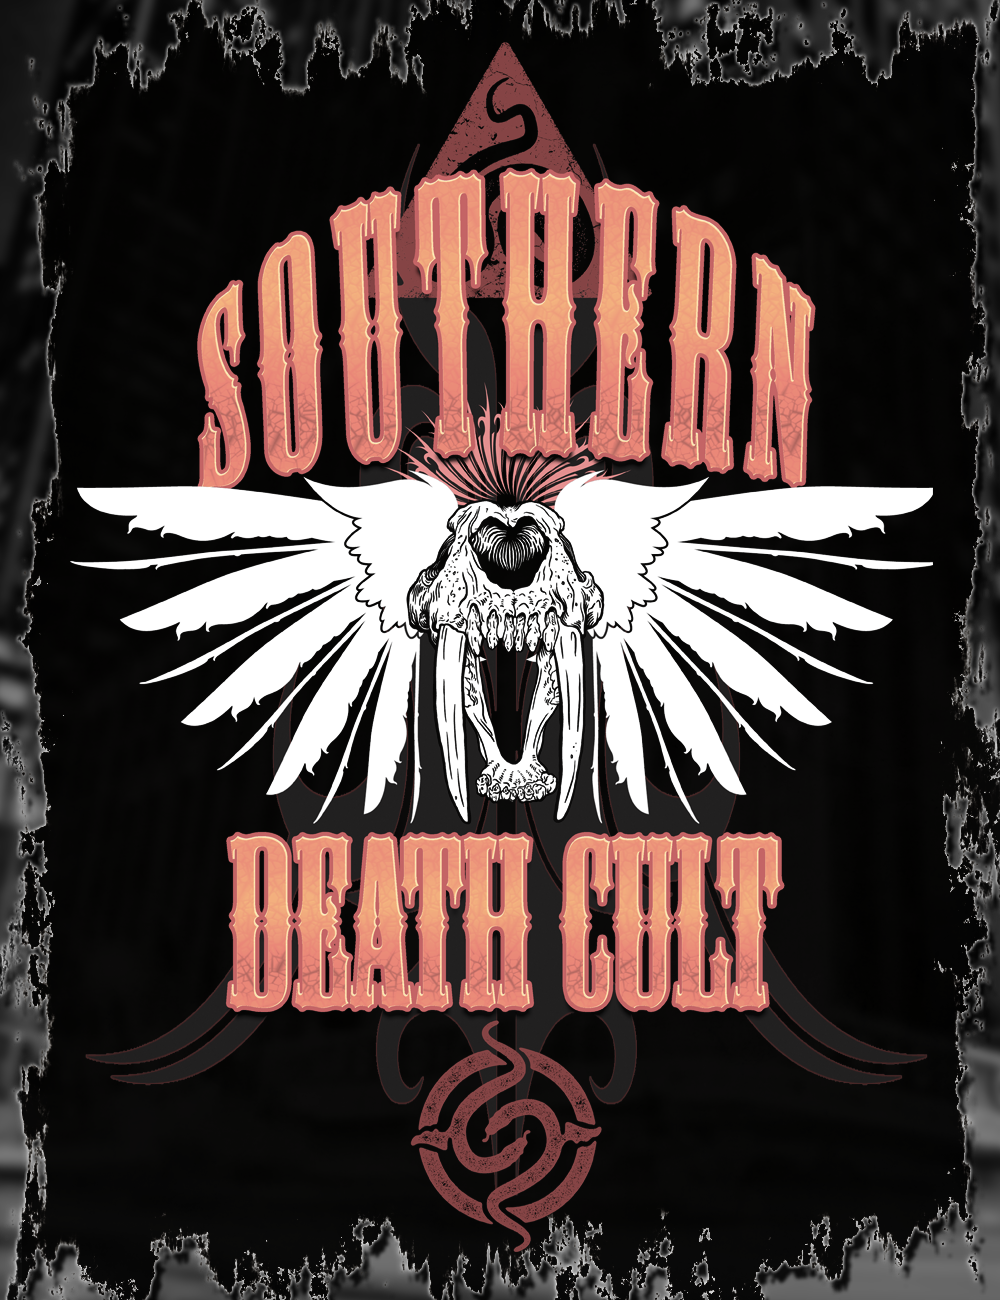 Southern Death Cult Tee Design